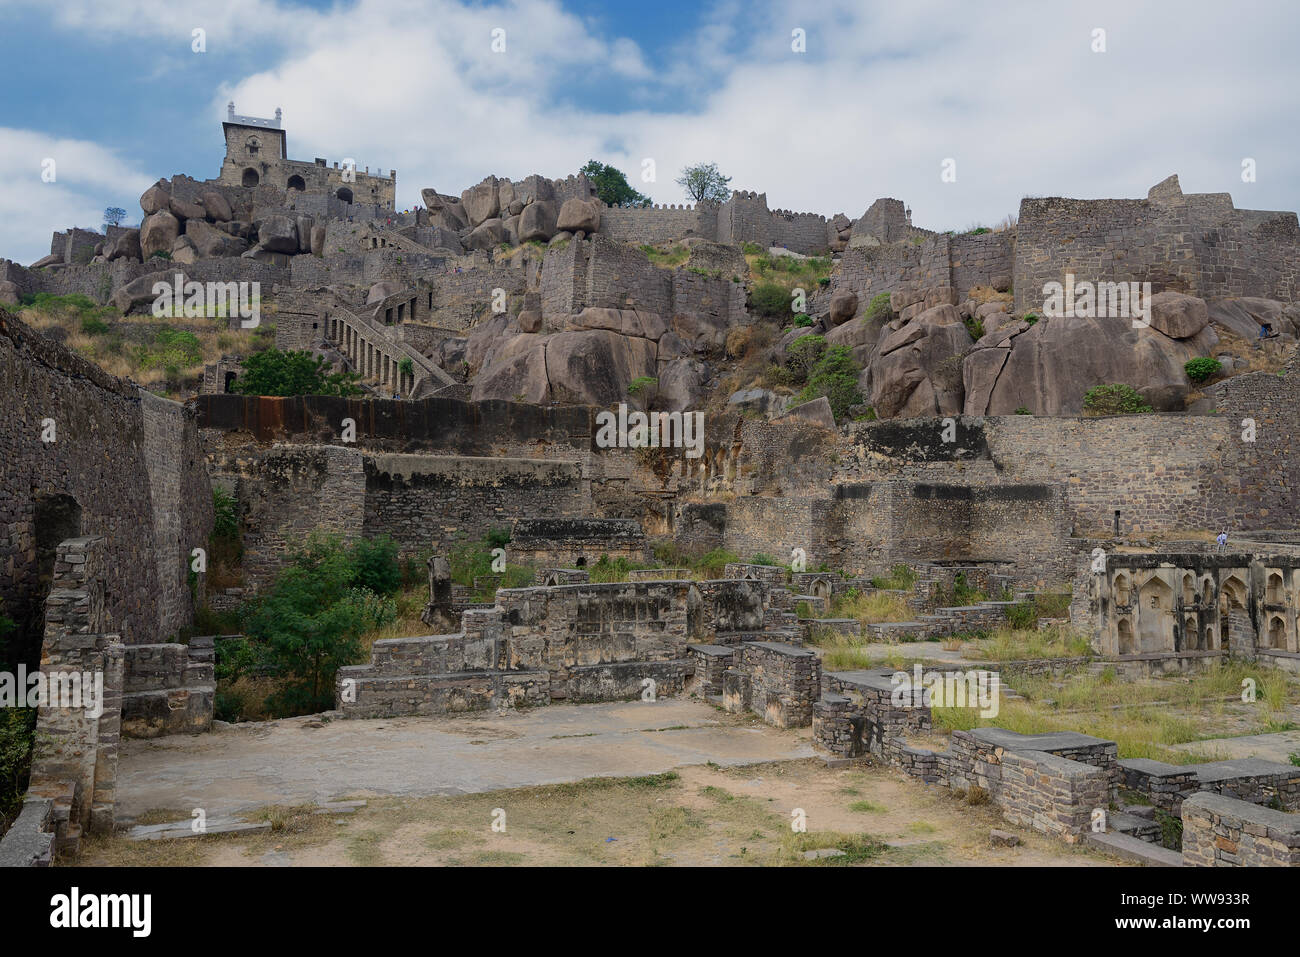 Golconda Fort, also known as Golkonda or Golla Konda is a fortified citadel located in Hyderabad, India Stock Photo